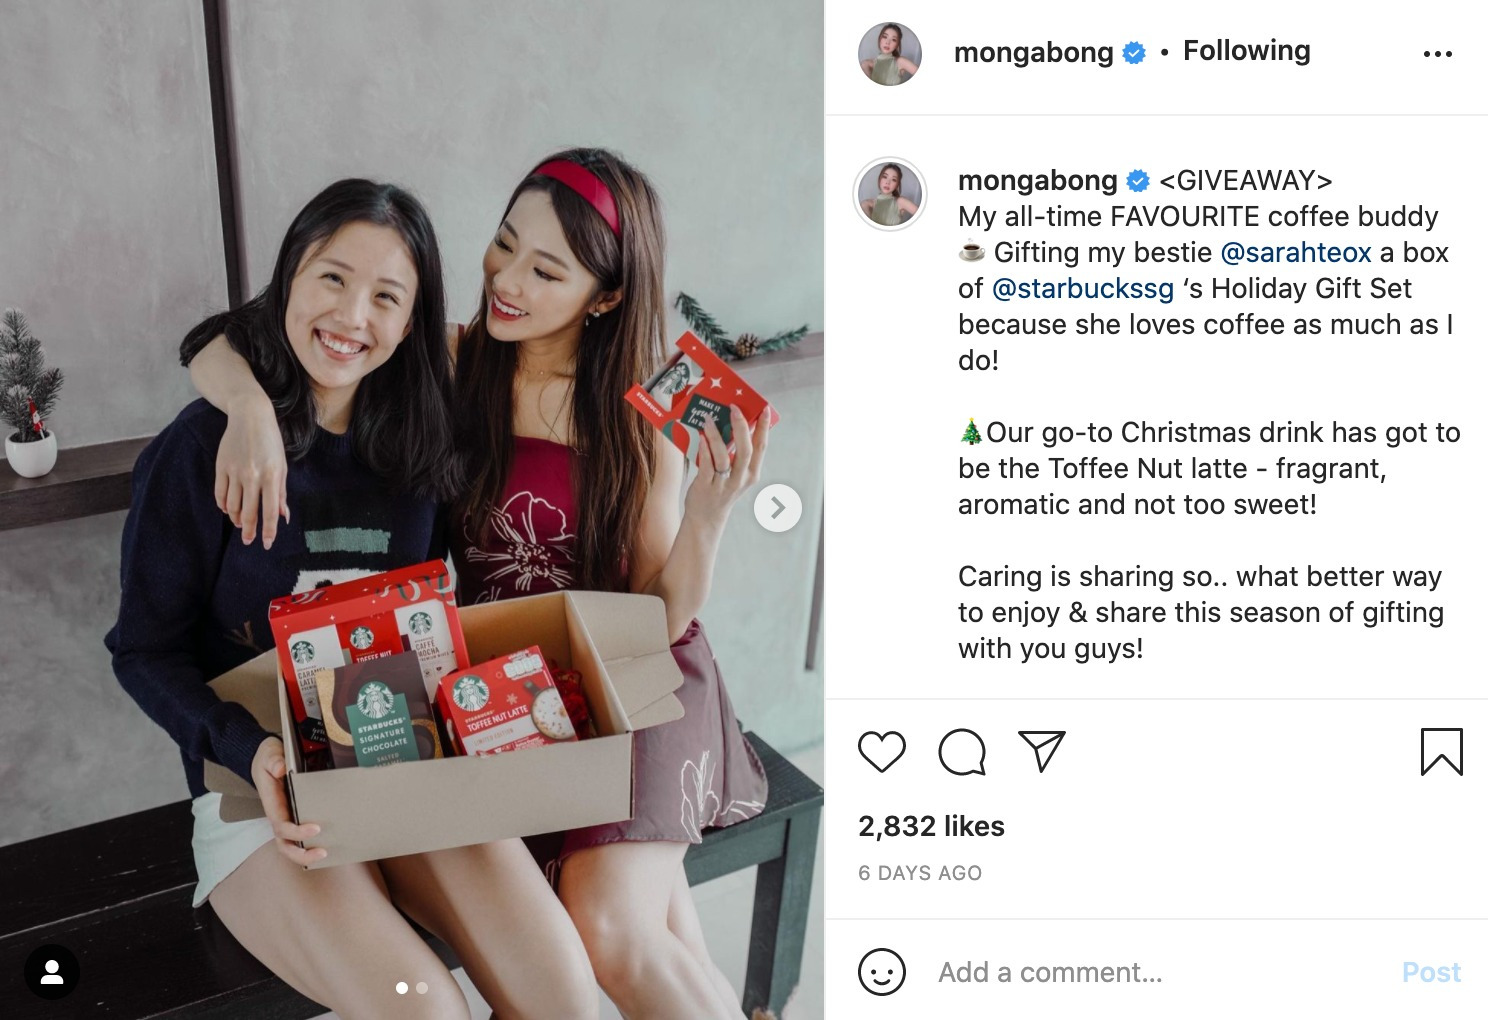 Mongabong's sponsored Insta post about a giveaway